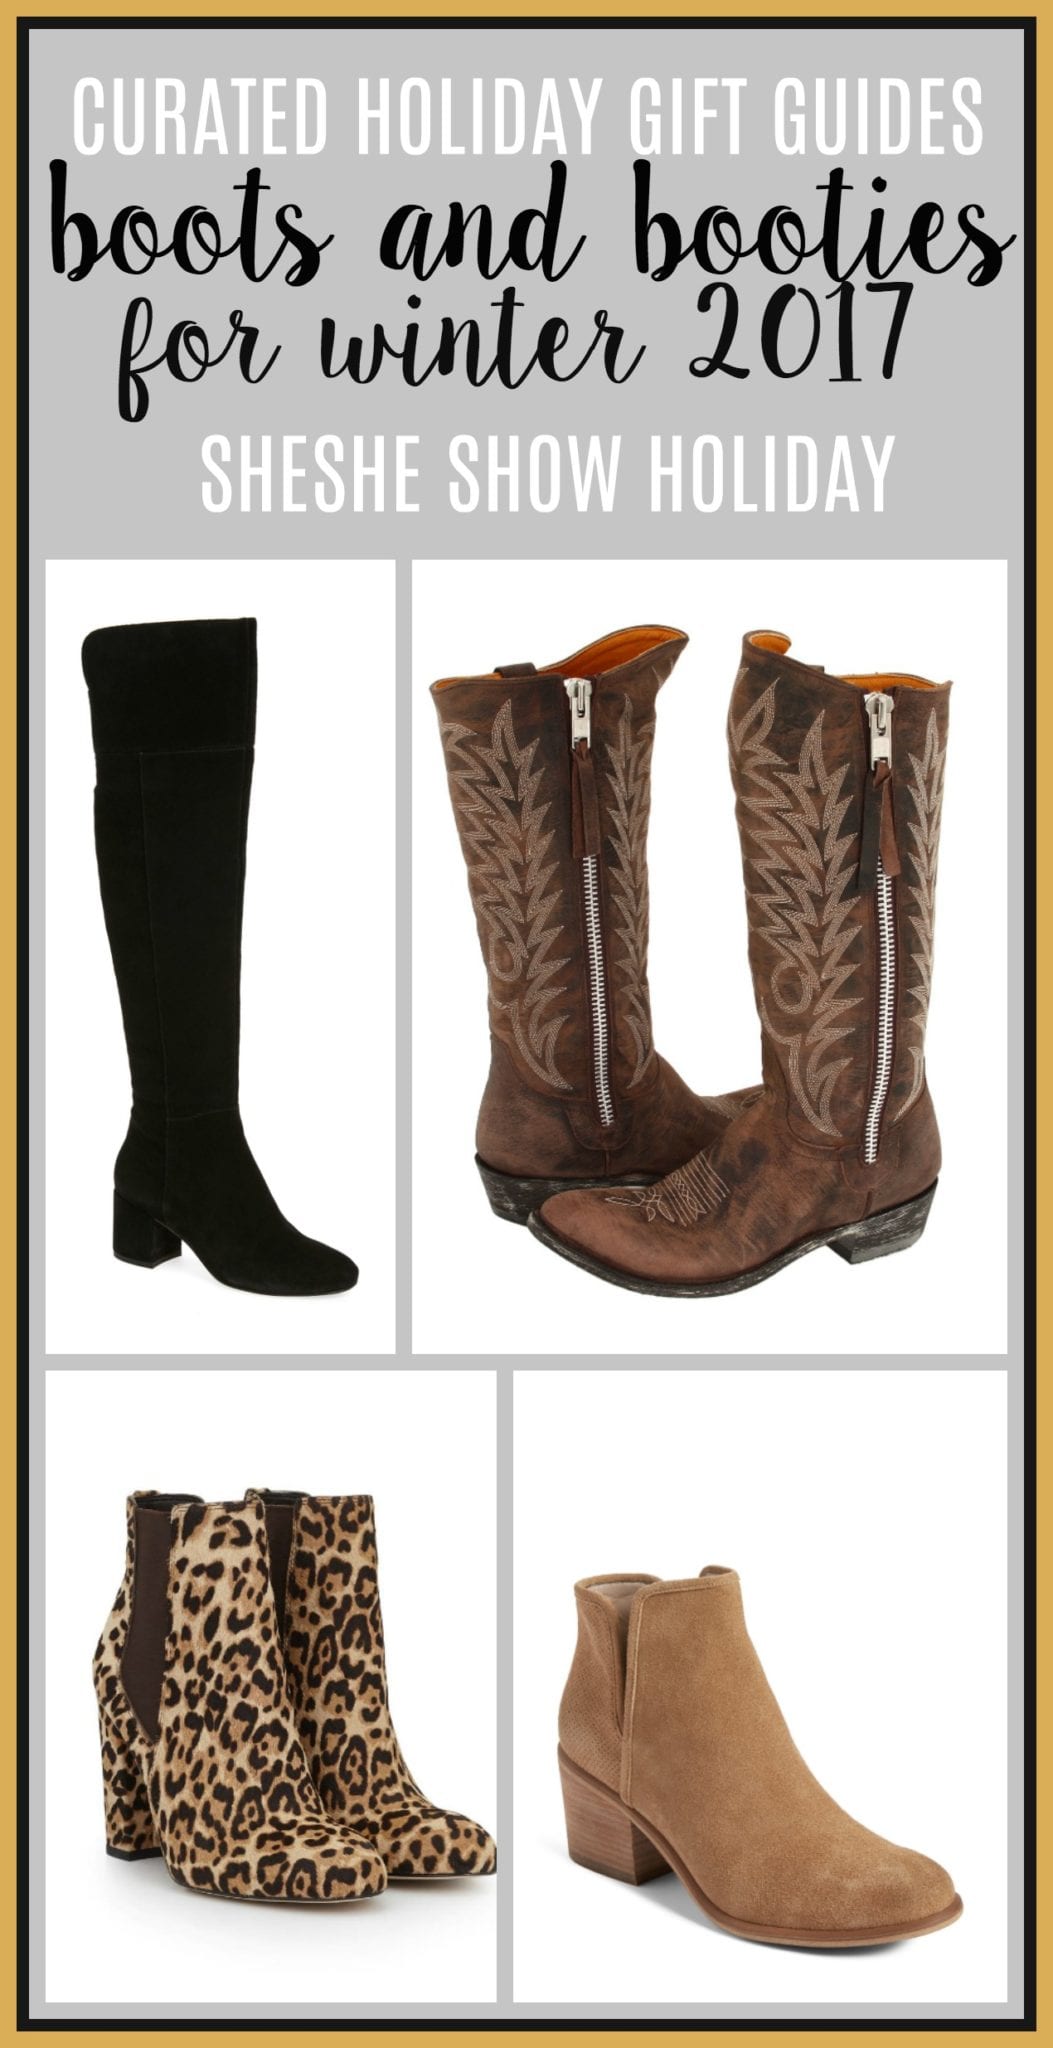 boots, booties, winter, holiday, gift guide, 2017, sheshe show, gifts